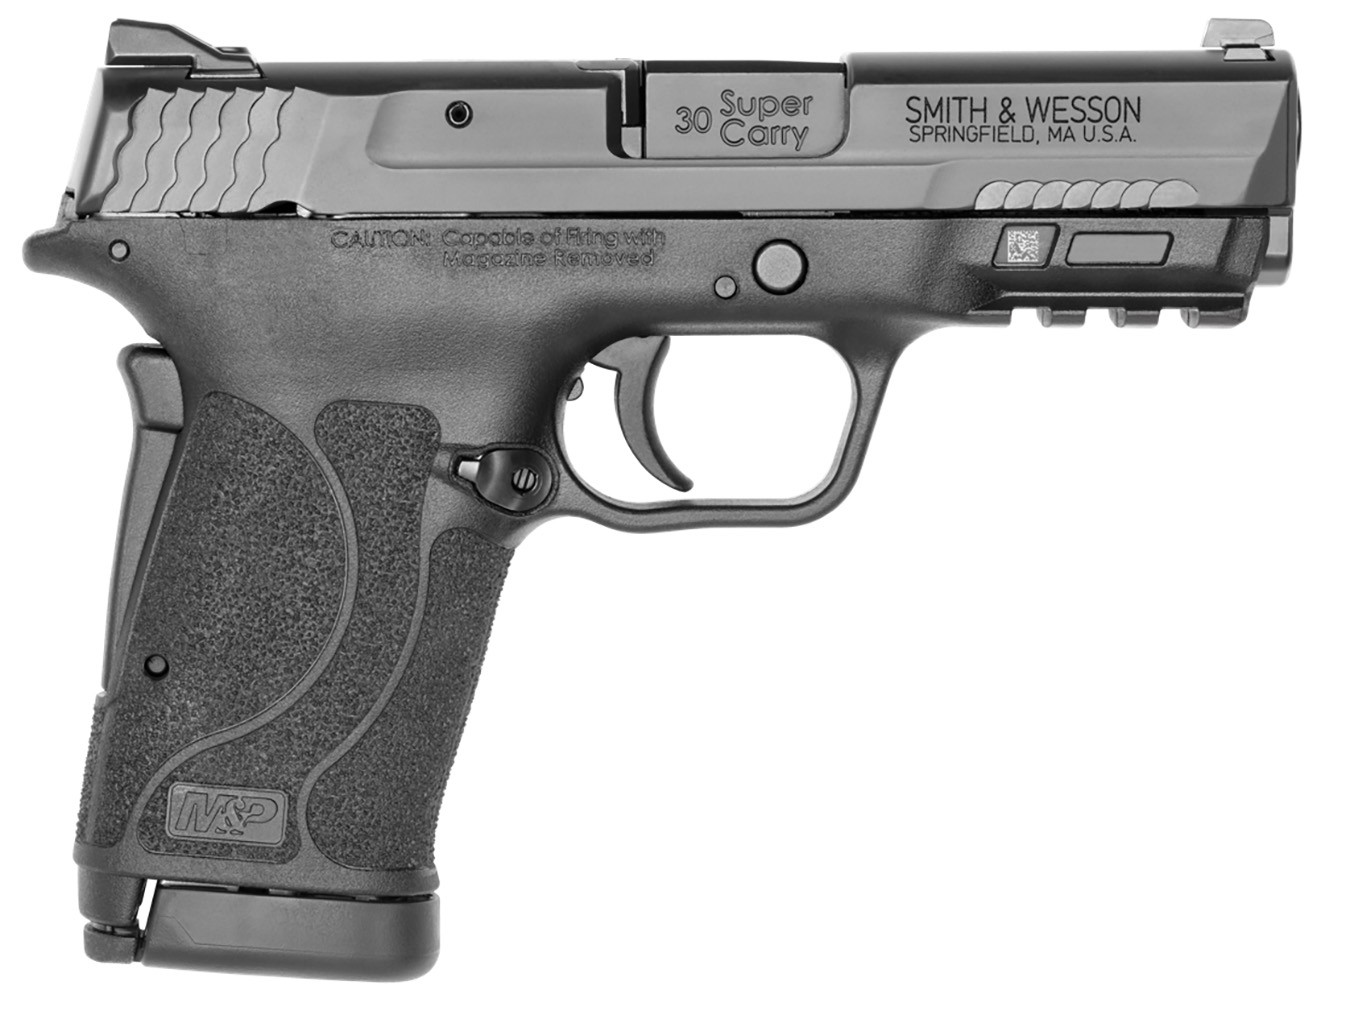 No. 15 Best Selling: SMITH AND WESSON MP SHIELD EZ NO THUMB SAFETY, BLK 30 SUPER CARRY 3.675IN 10RND